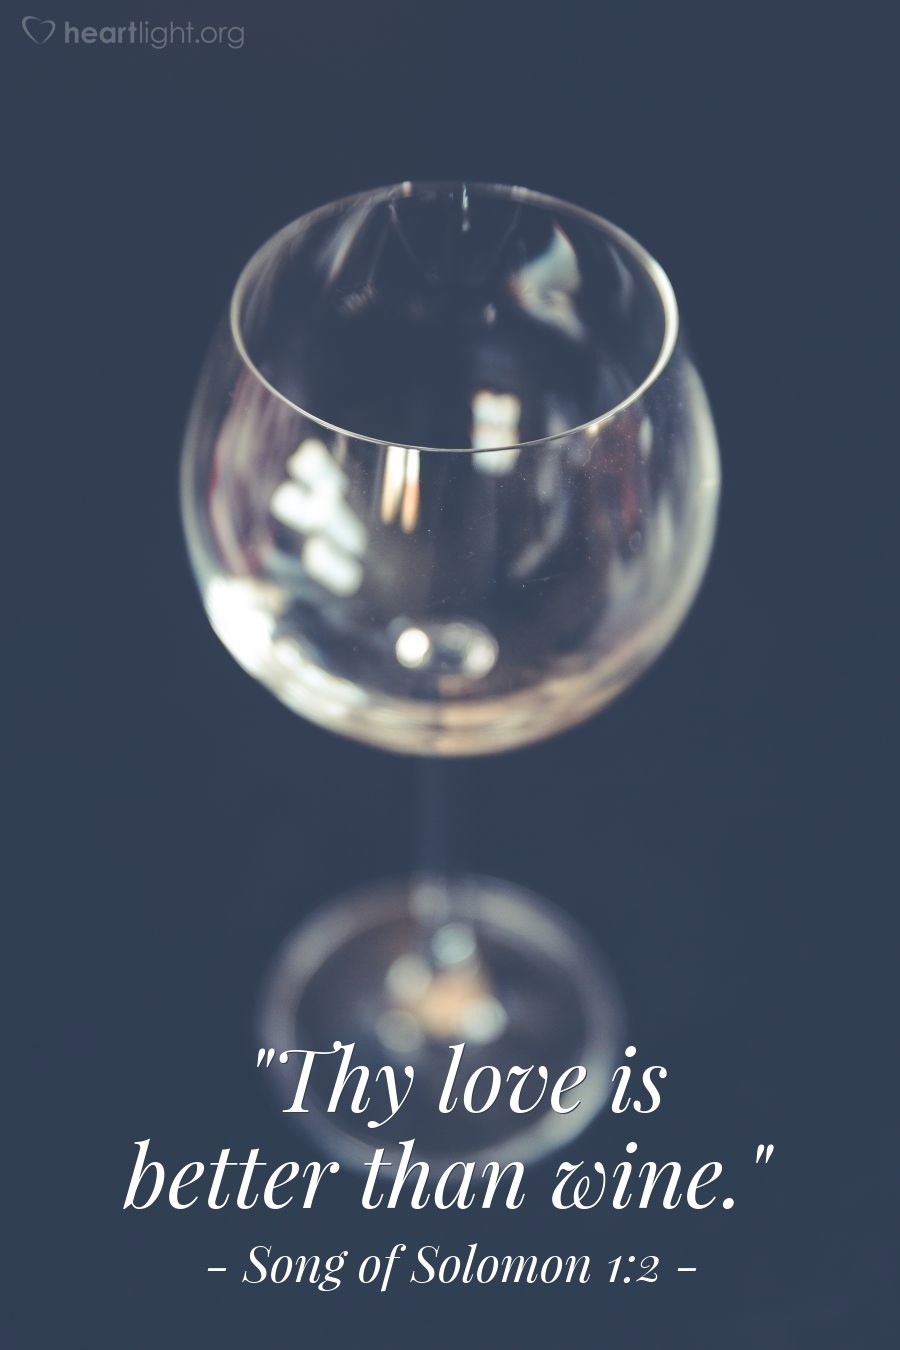 Illustration of Song of Solomon 1:2 — "Thy love is better than wine."